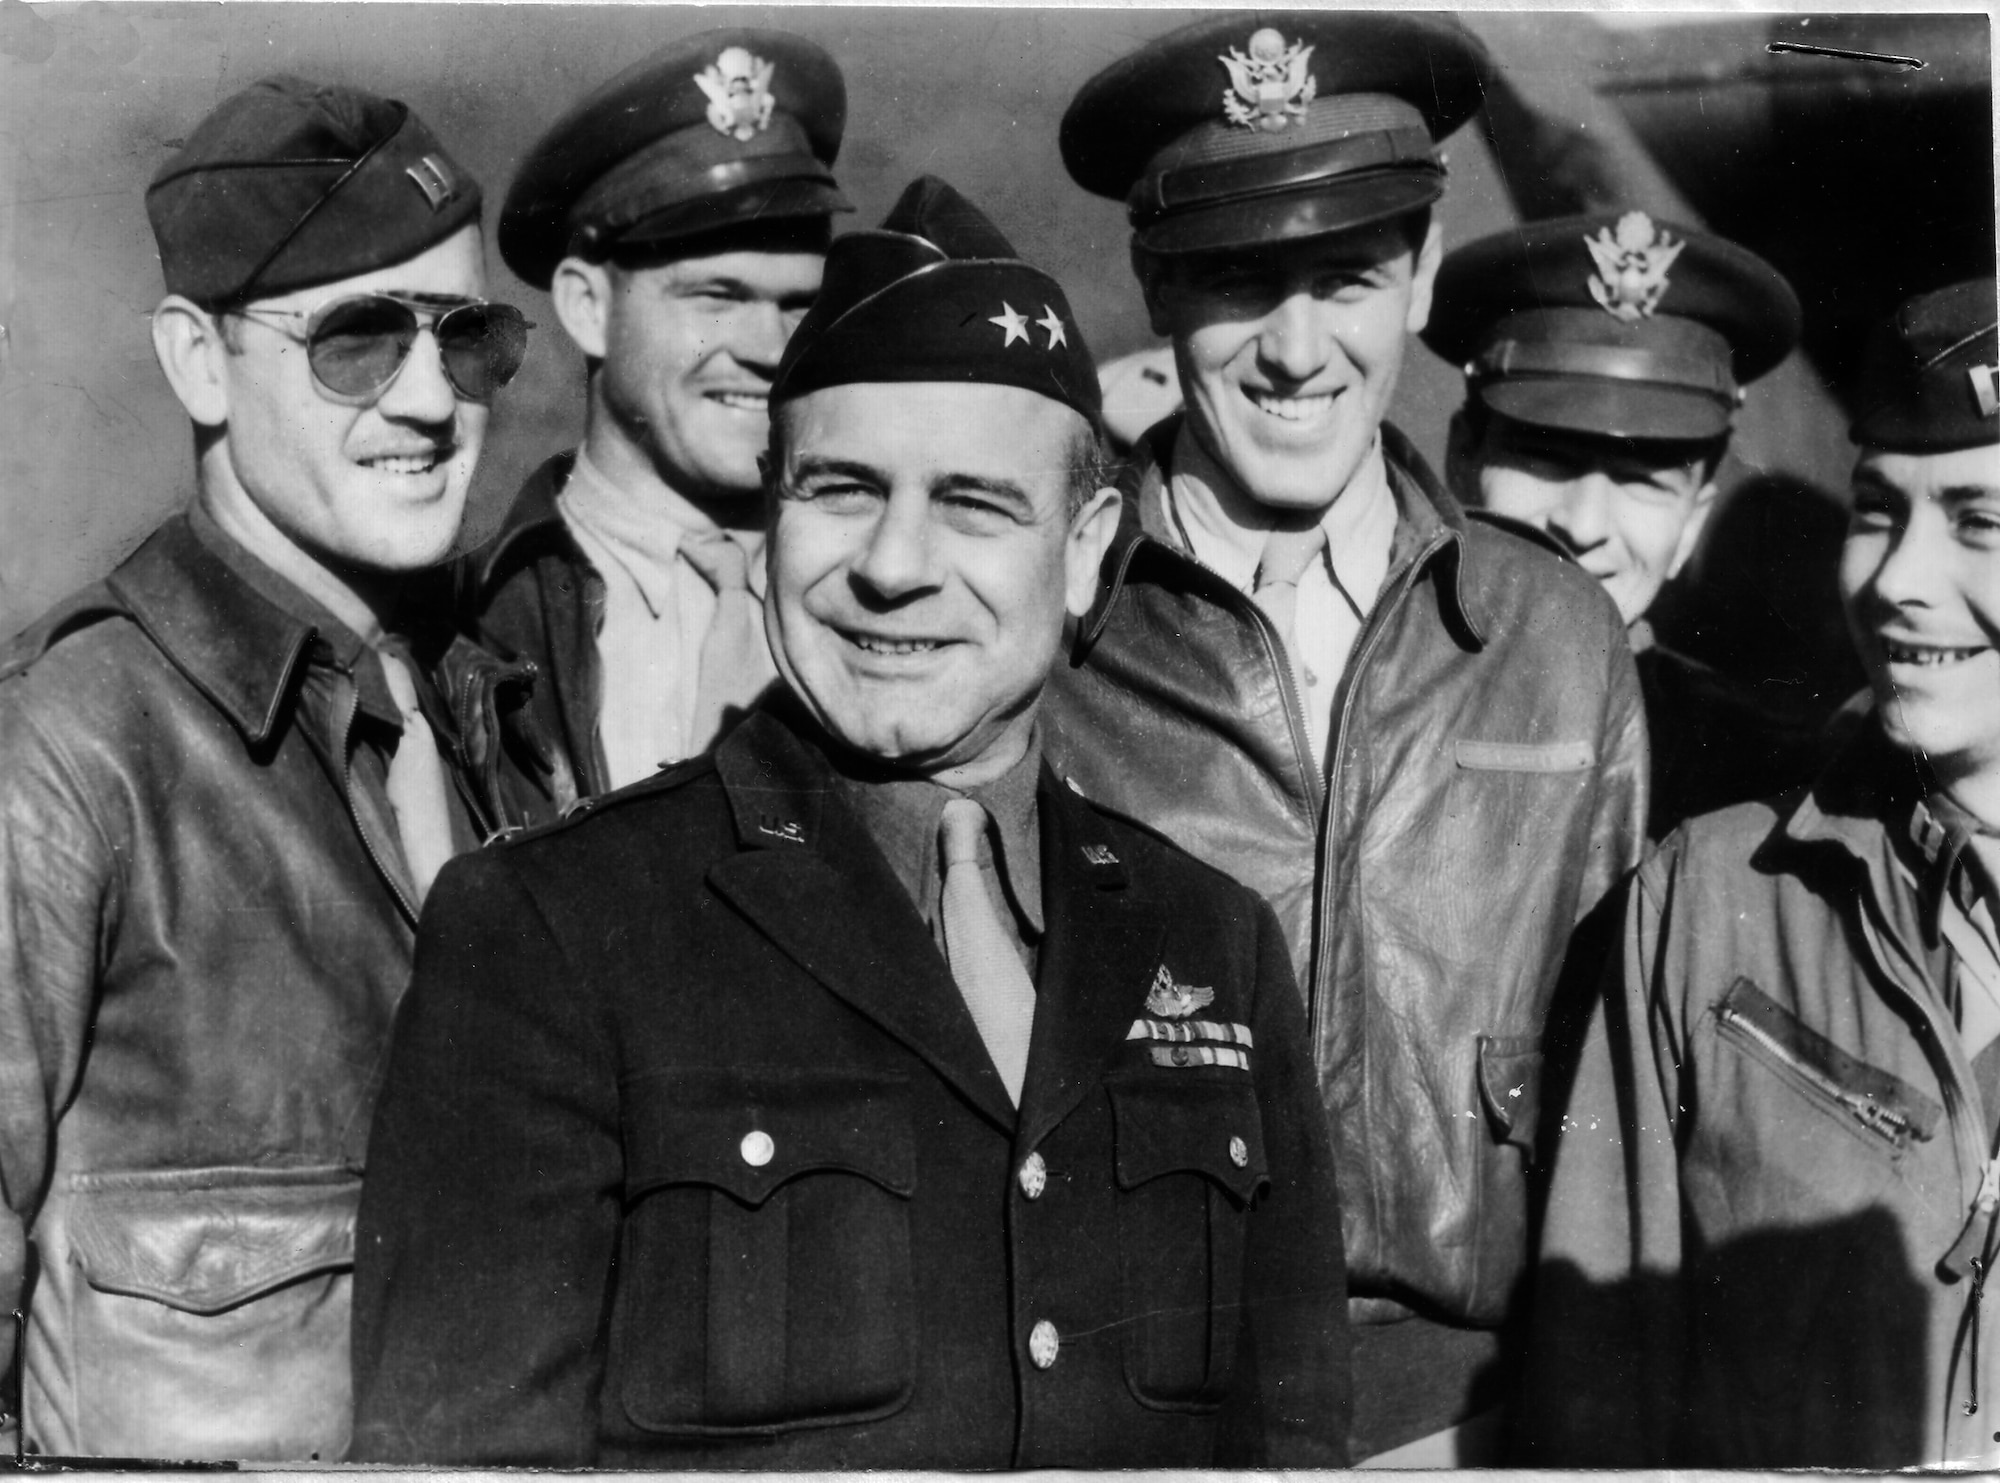 Lt. Gen. James H. Doolittle (center), commander of the Army Air Forces  Eighth Air Force, is surrounded by a group of U.S. flyers. (This picture was taken before his promotion to lieutenant general.)  The general took part in the first raid on Tokyo on April 18,1942, when a squadron of B-25 bombers, not designed for carrier operations, took off from the USS Hornet in the North Pacific Ocean to bomb military installations in Japan. (U.S. Air Force photo)